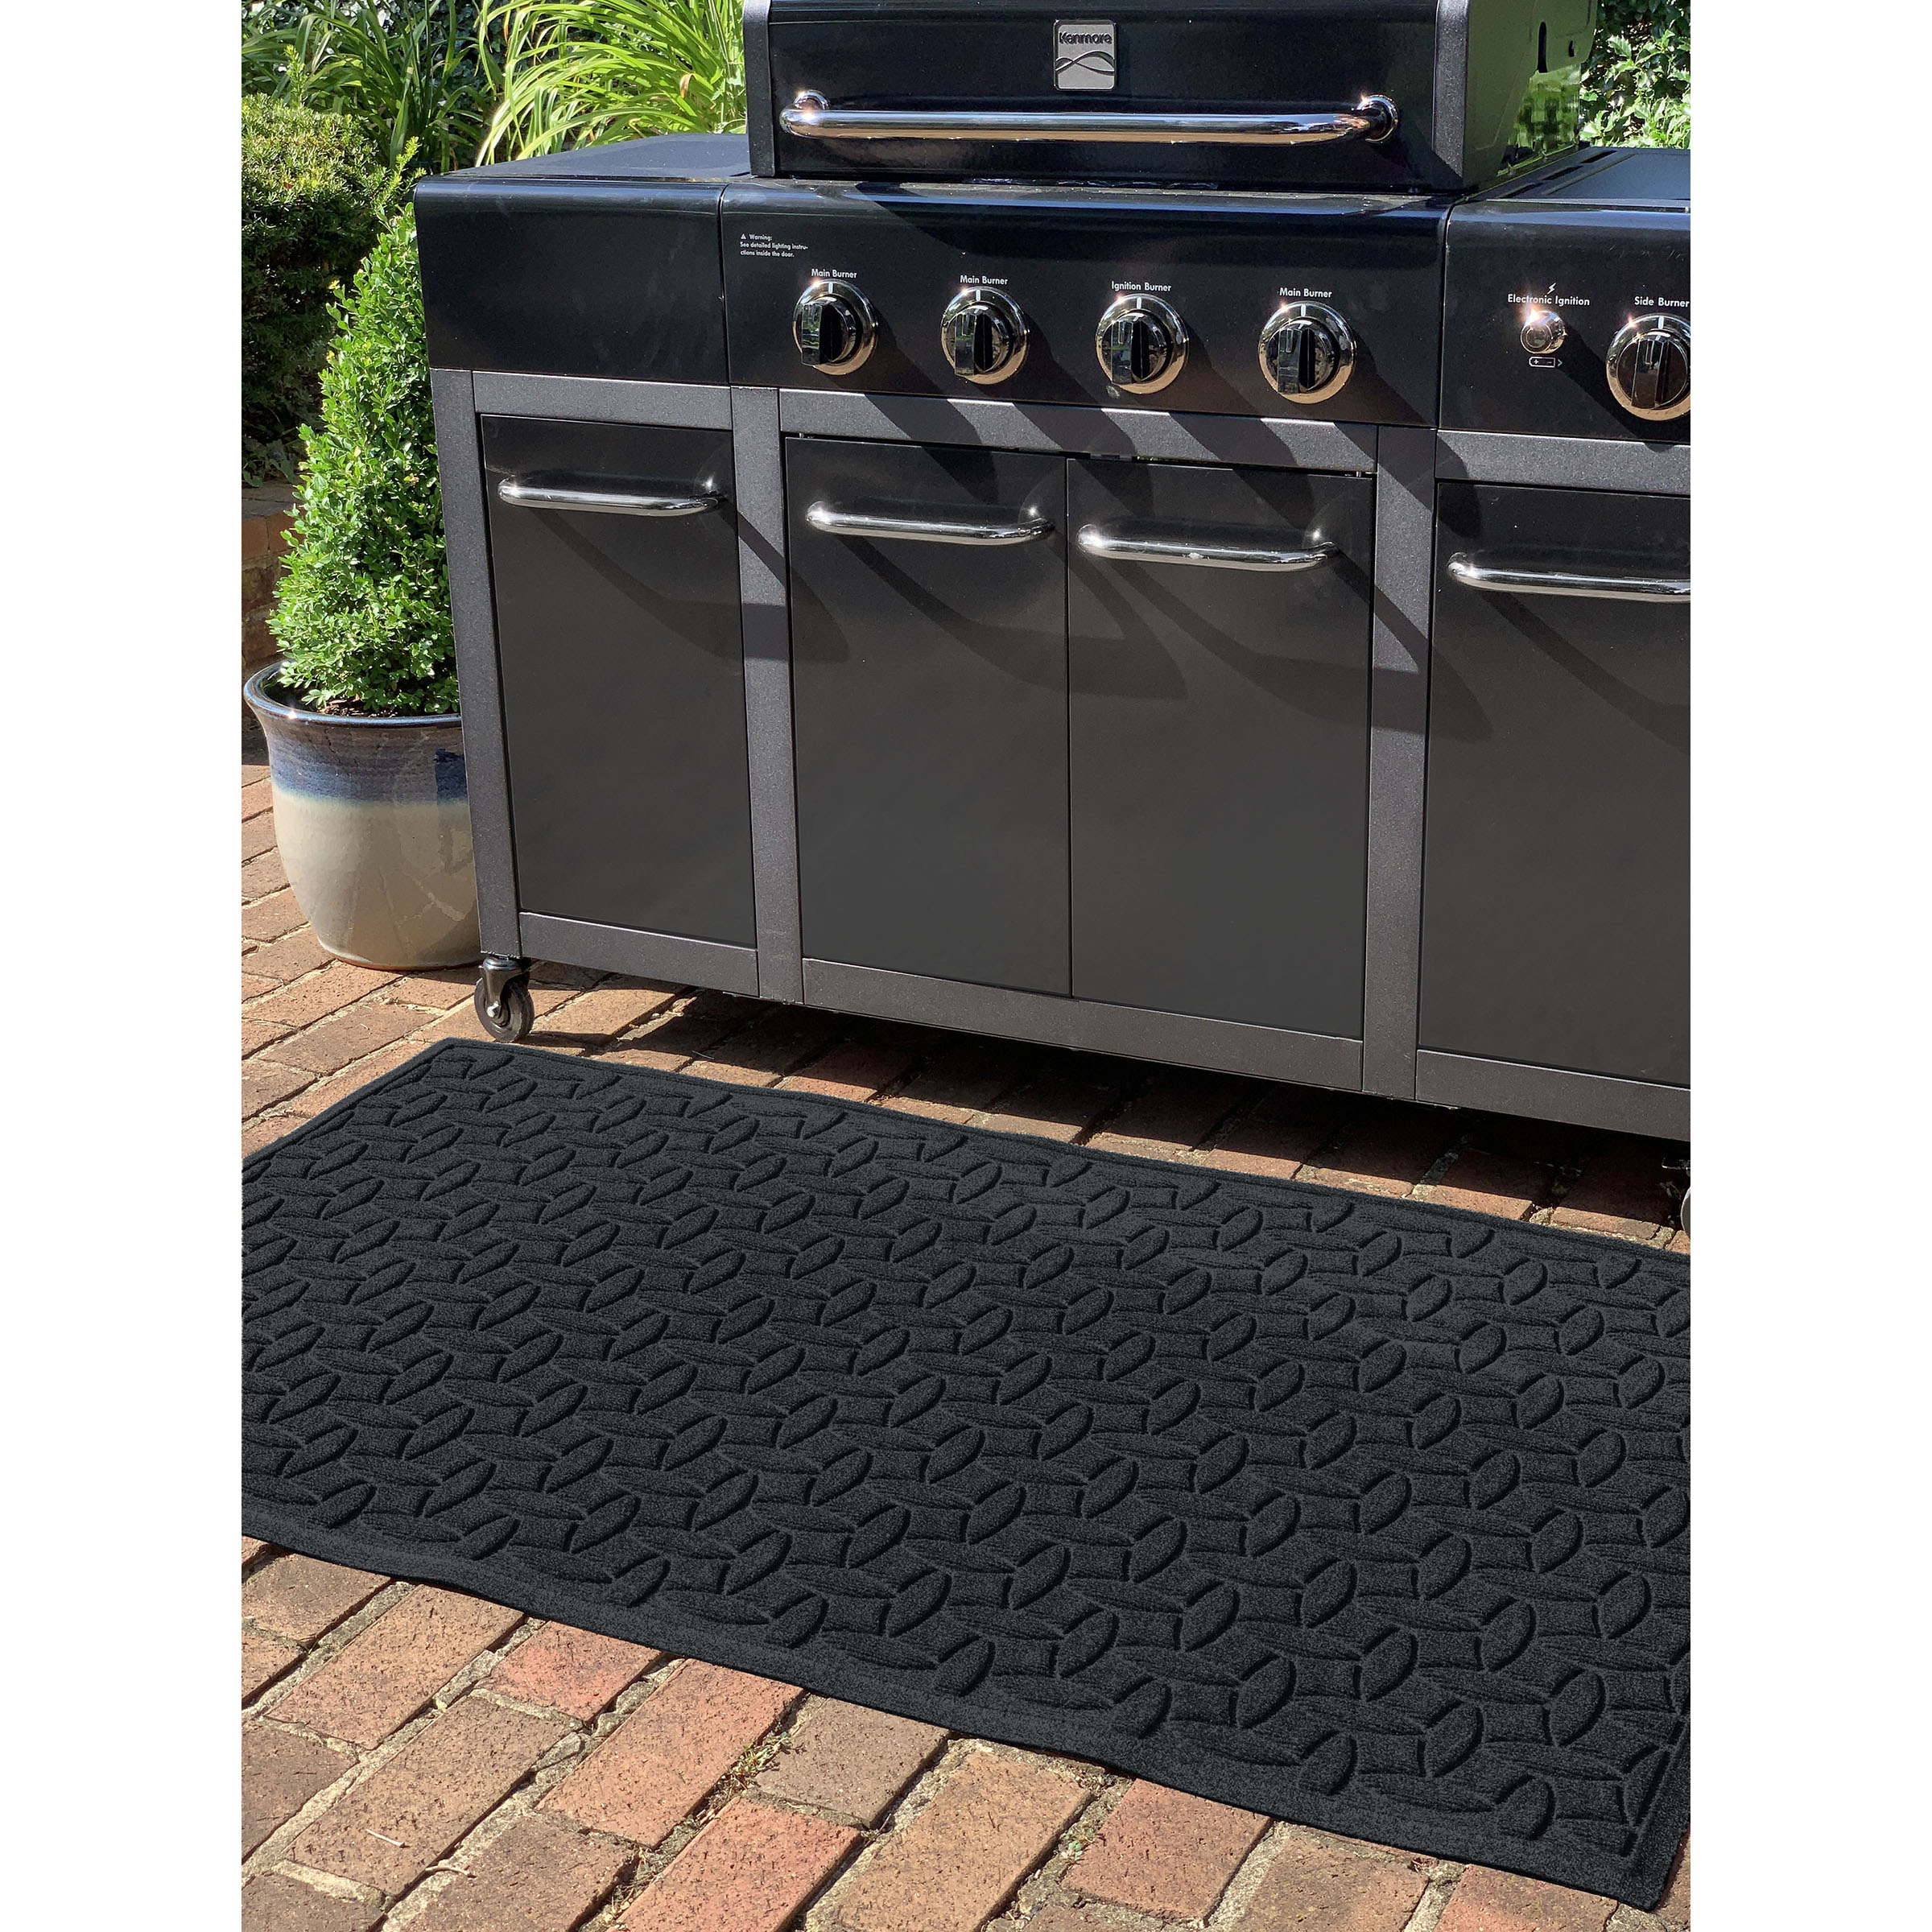 A Rubber Kitchen Floor Mat Prevents Slips on Wayward Water and Grease!